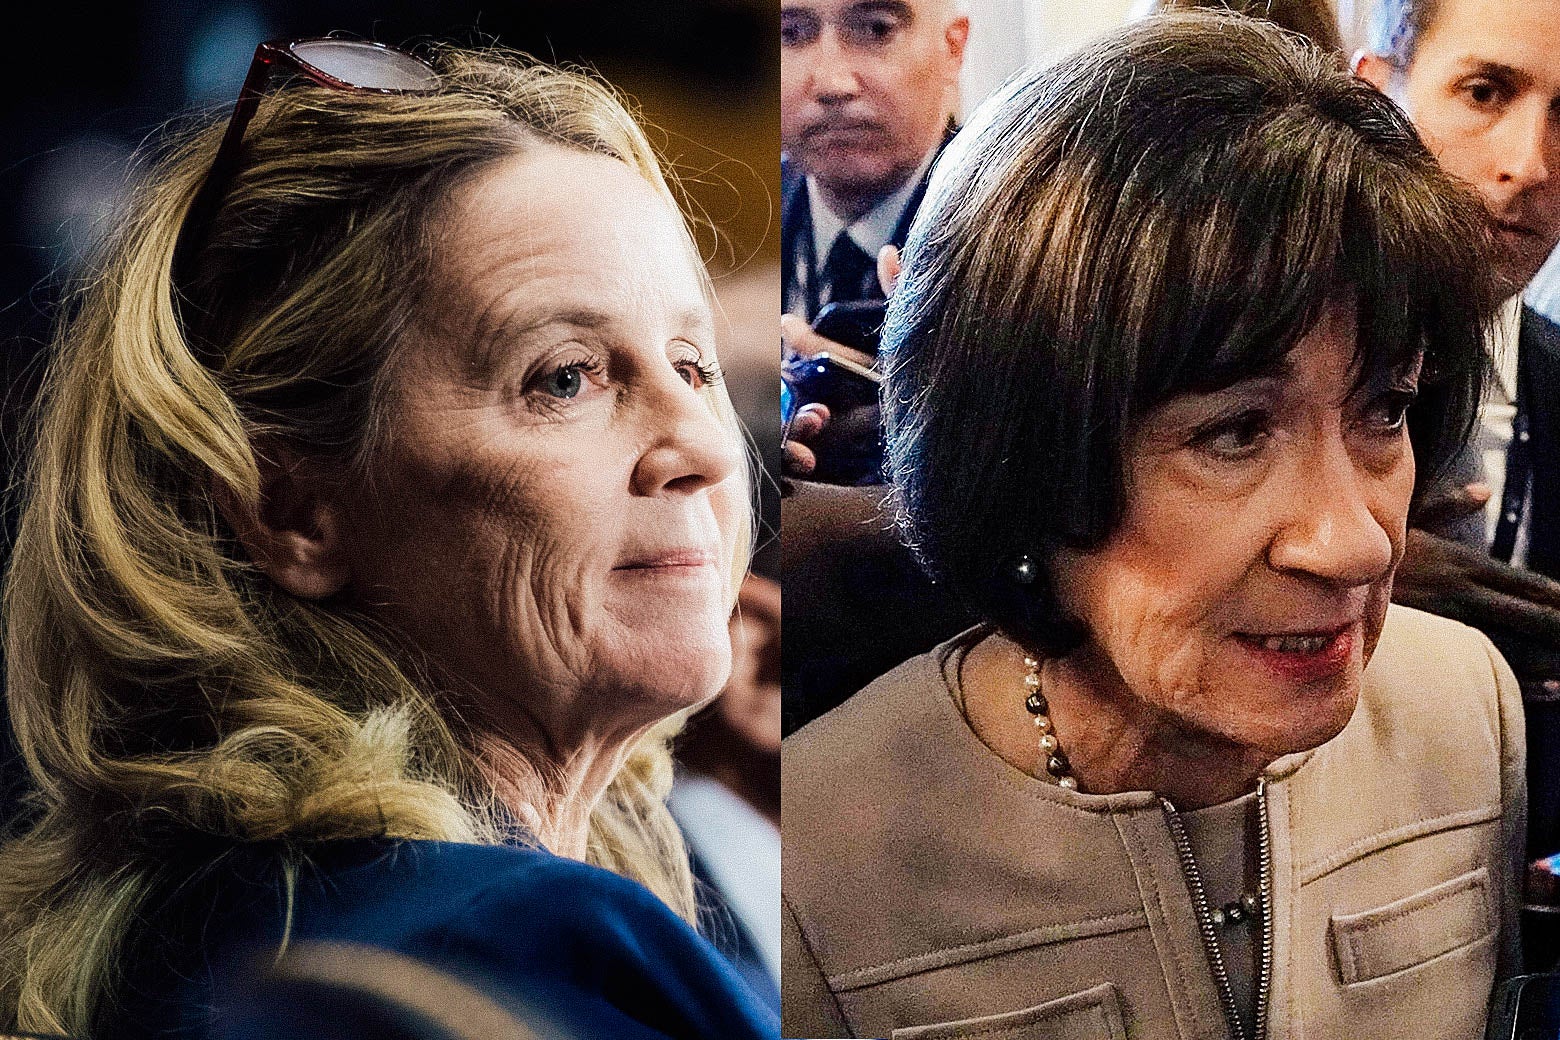 Christine Blasey Ford and Susan Collins.